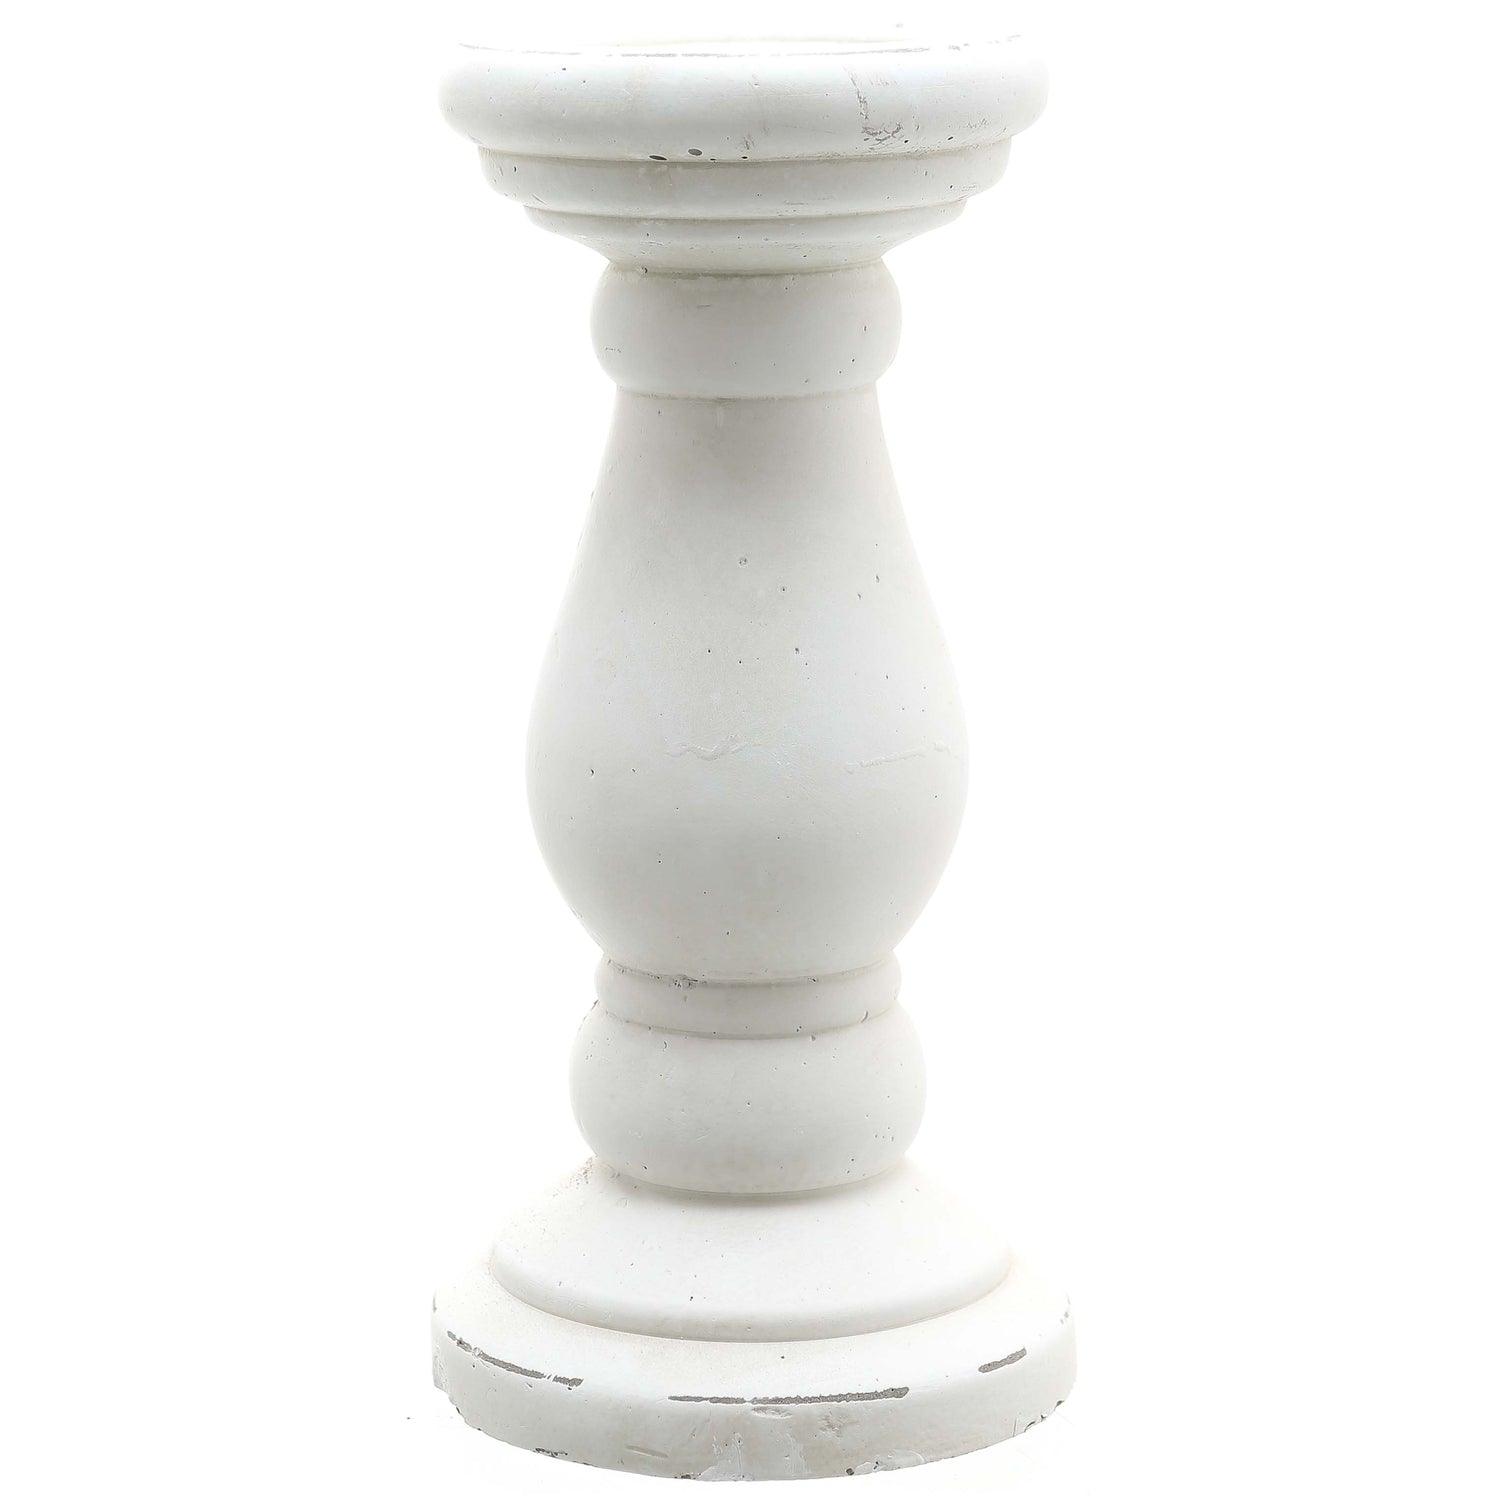 Matt White Ceramic Candle Holder - £34.95 - Gifts & Accessories > Candle Holders > Ornaments 